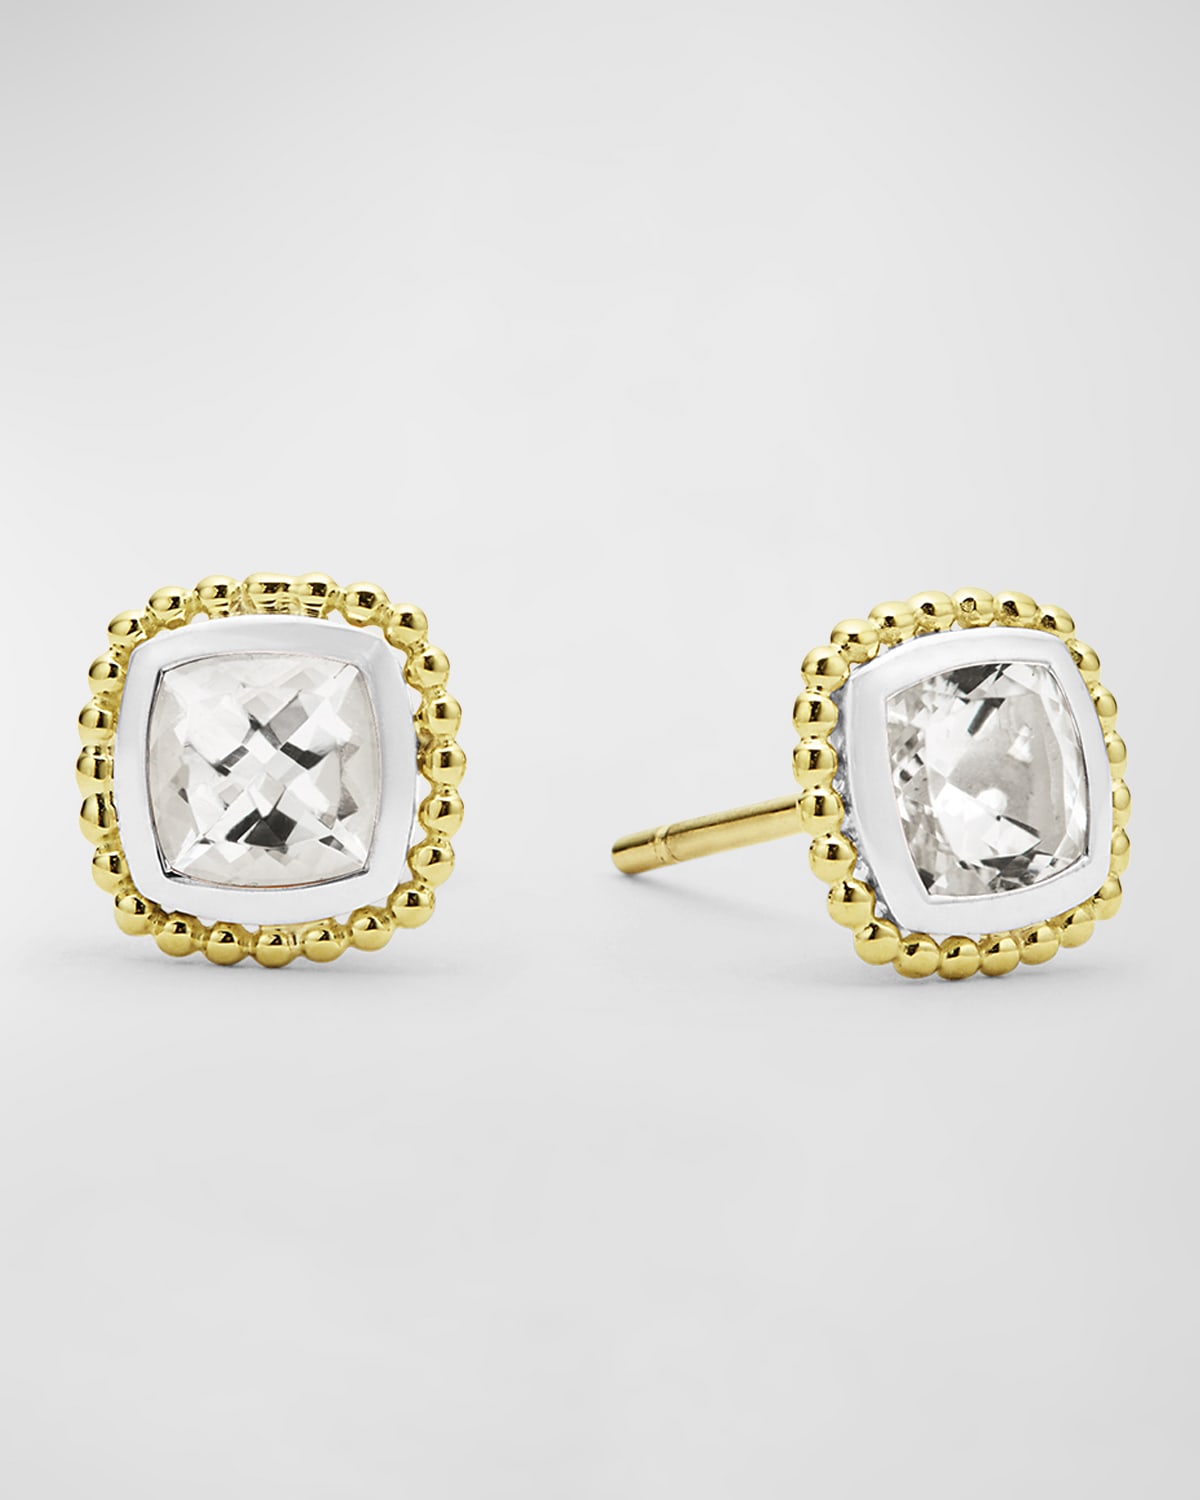 LAGOS RITTENHOUSE WHITE TOPAZ STUD EARRINGS IN 18K GOLD AND STERLING SILVER